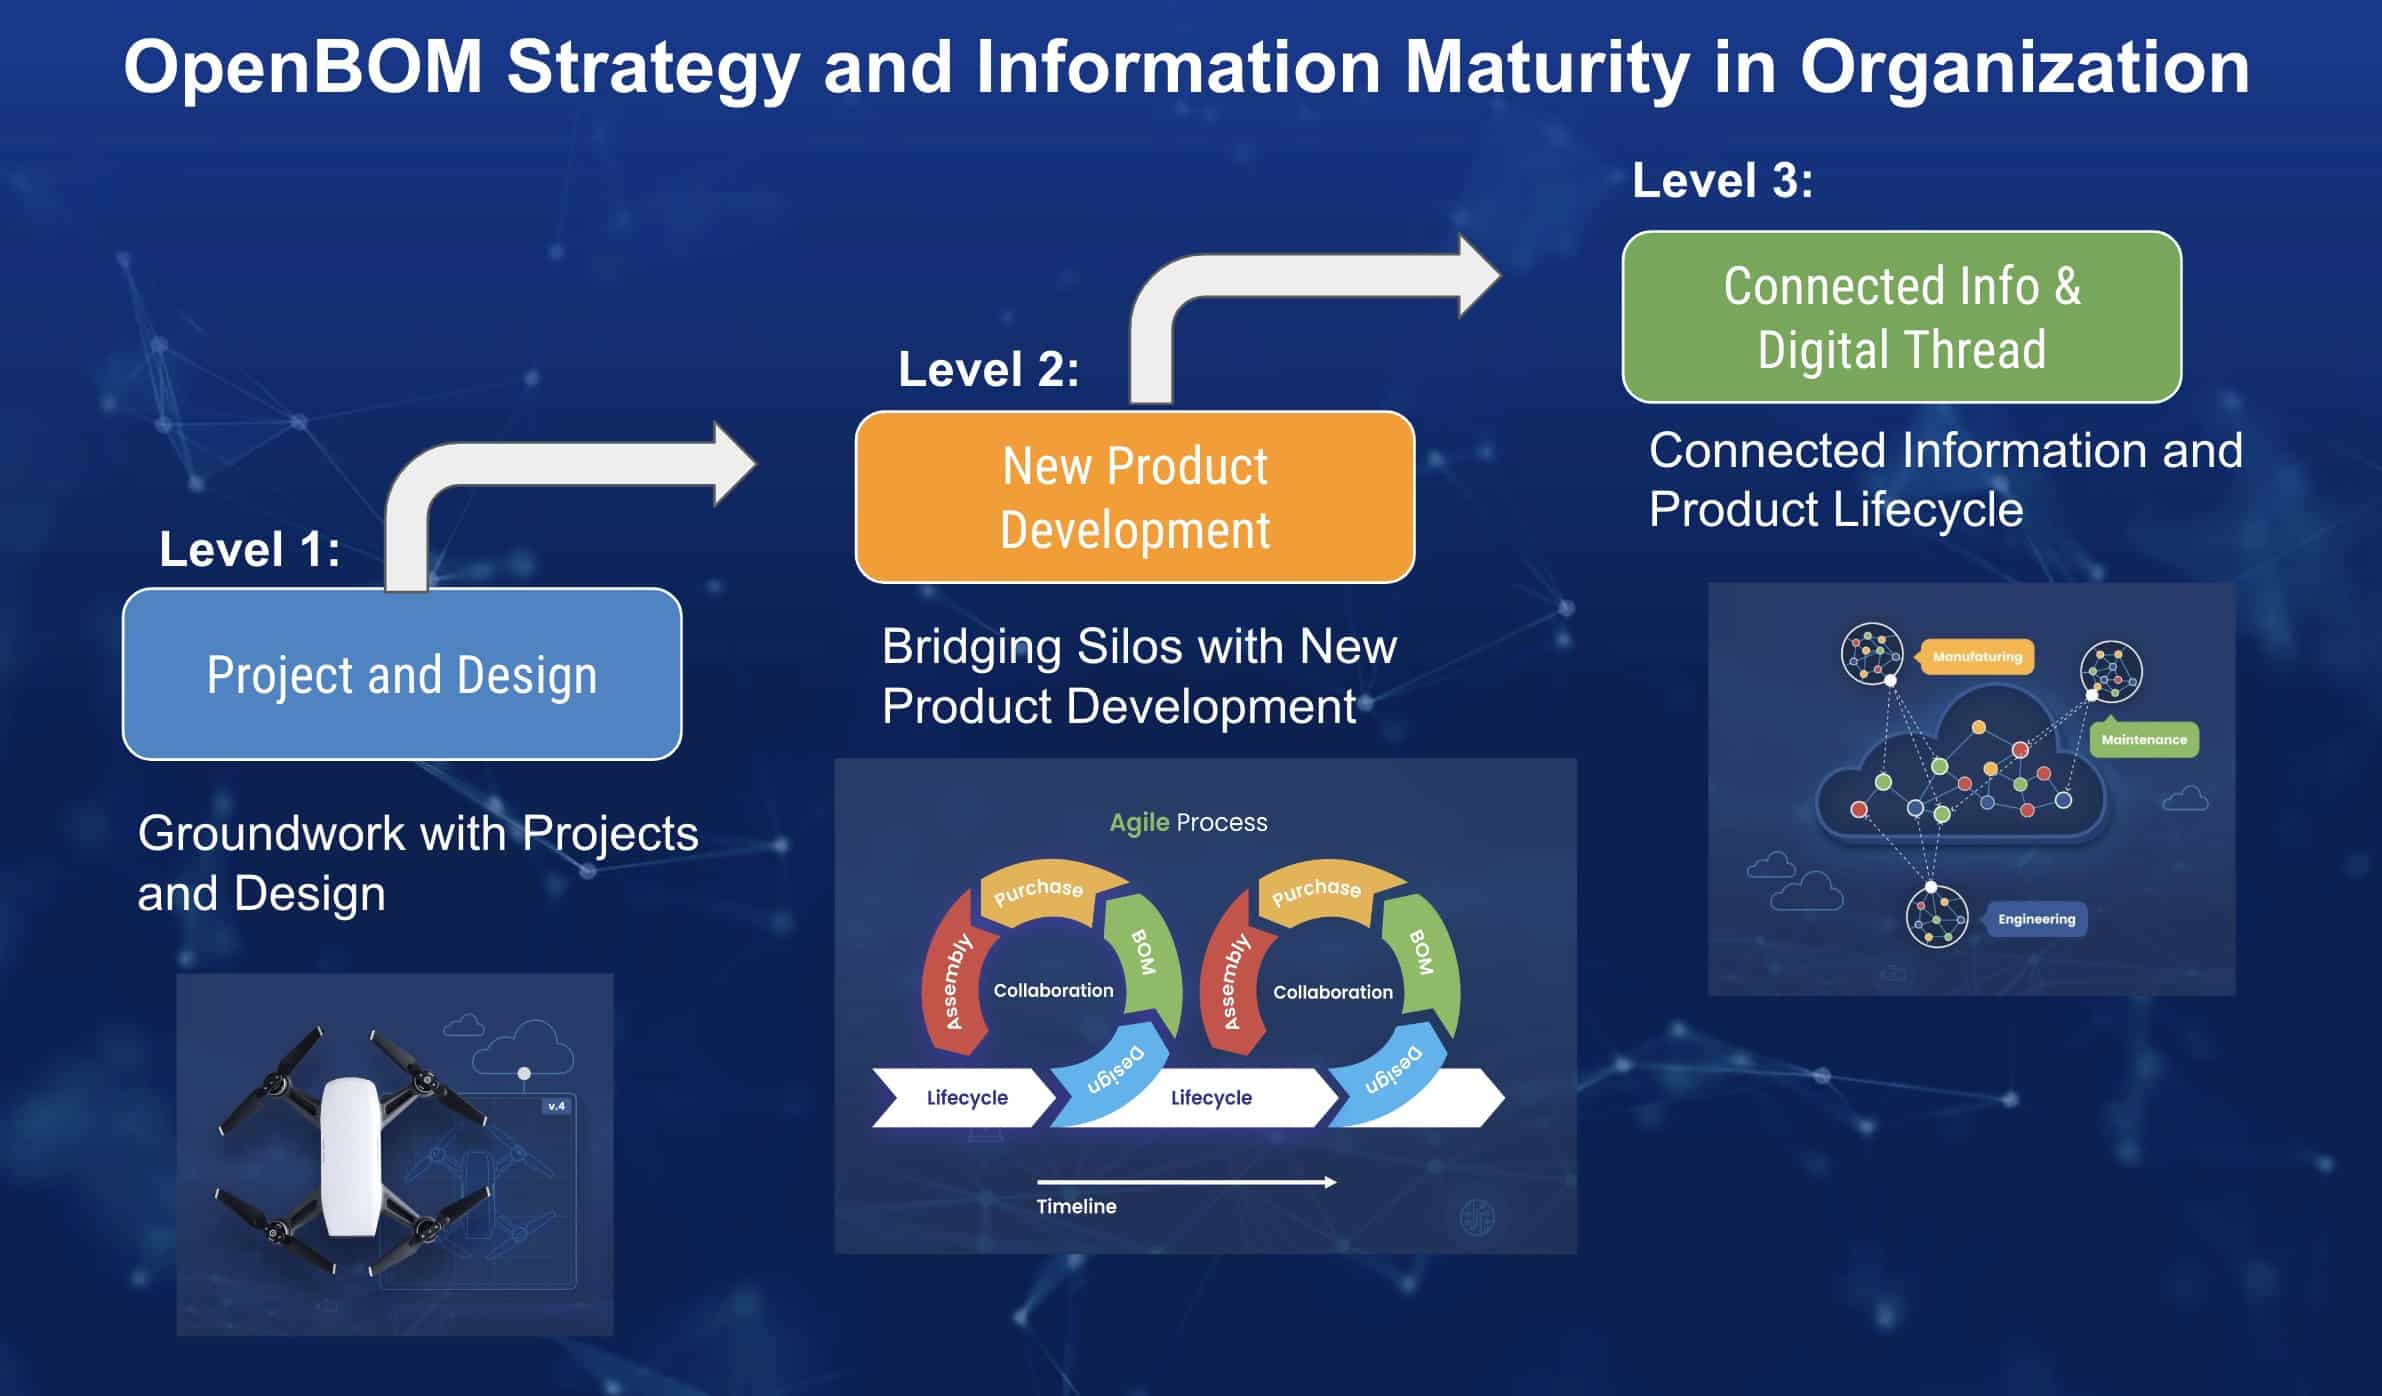 Organization Information Maturity and OpenBOM Implementations Phases